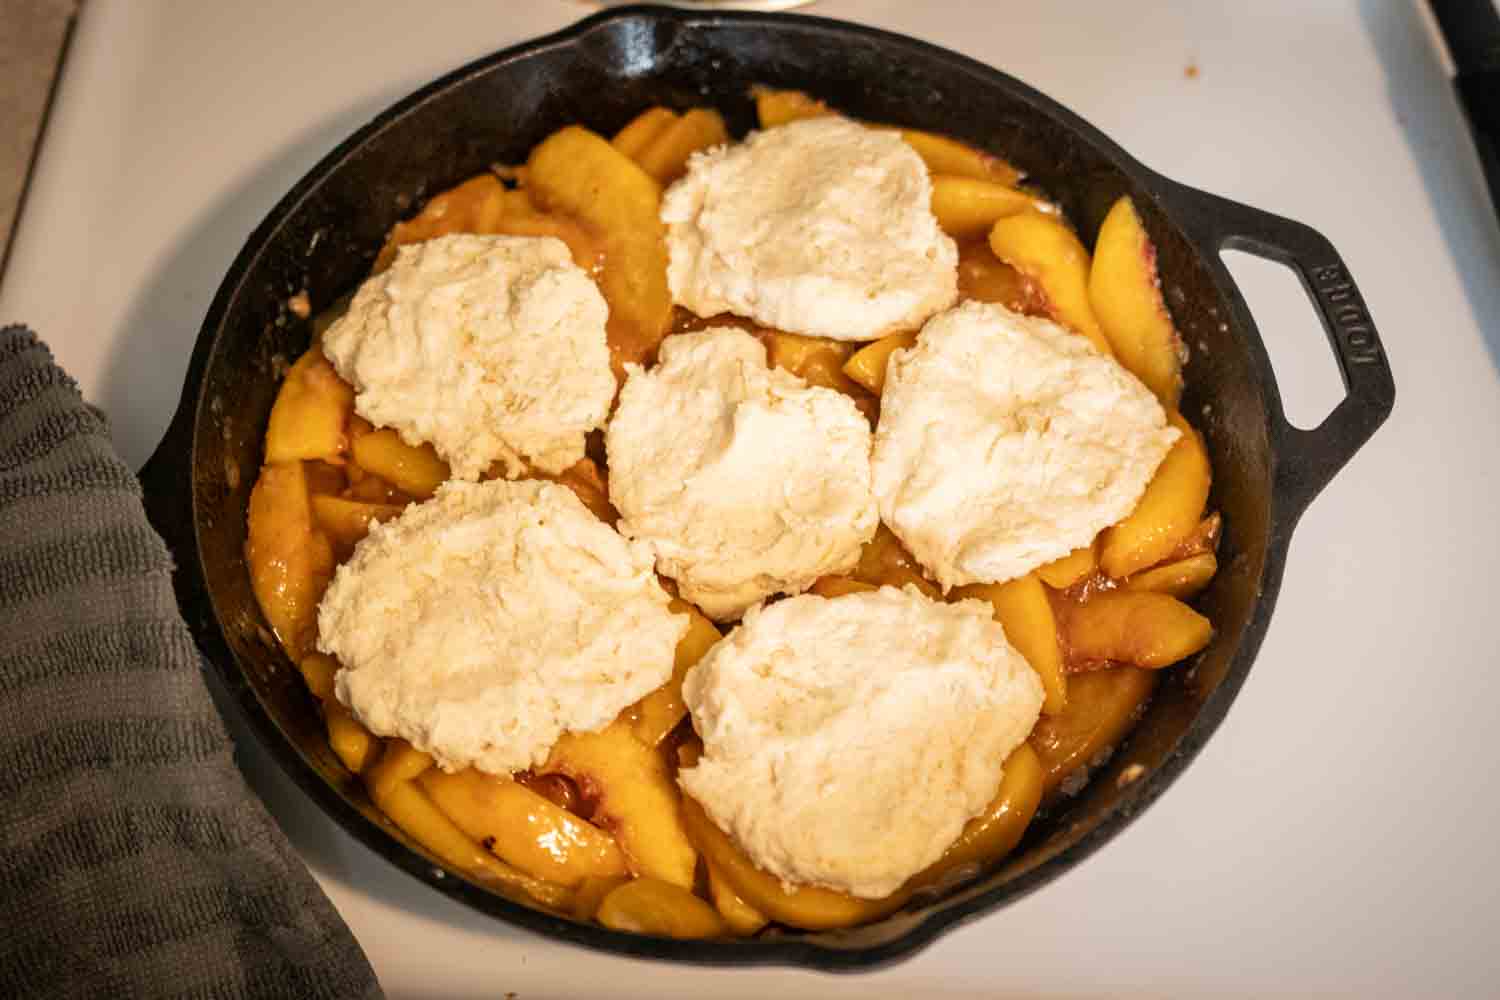 peach filling with unbaked sourdough biscuits on top